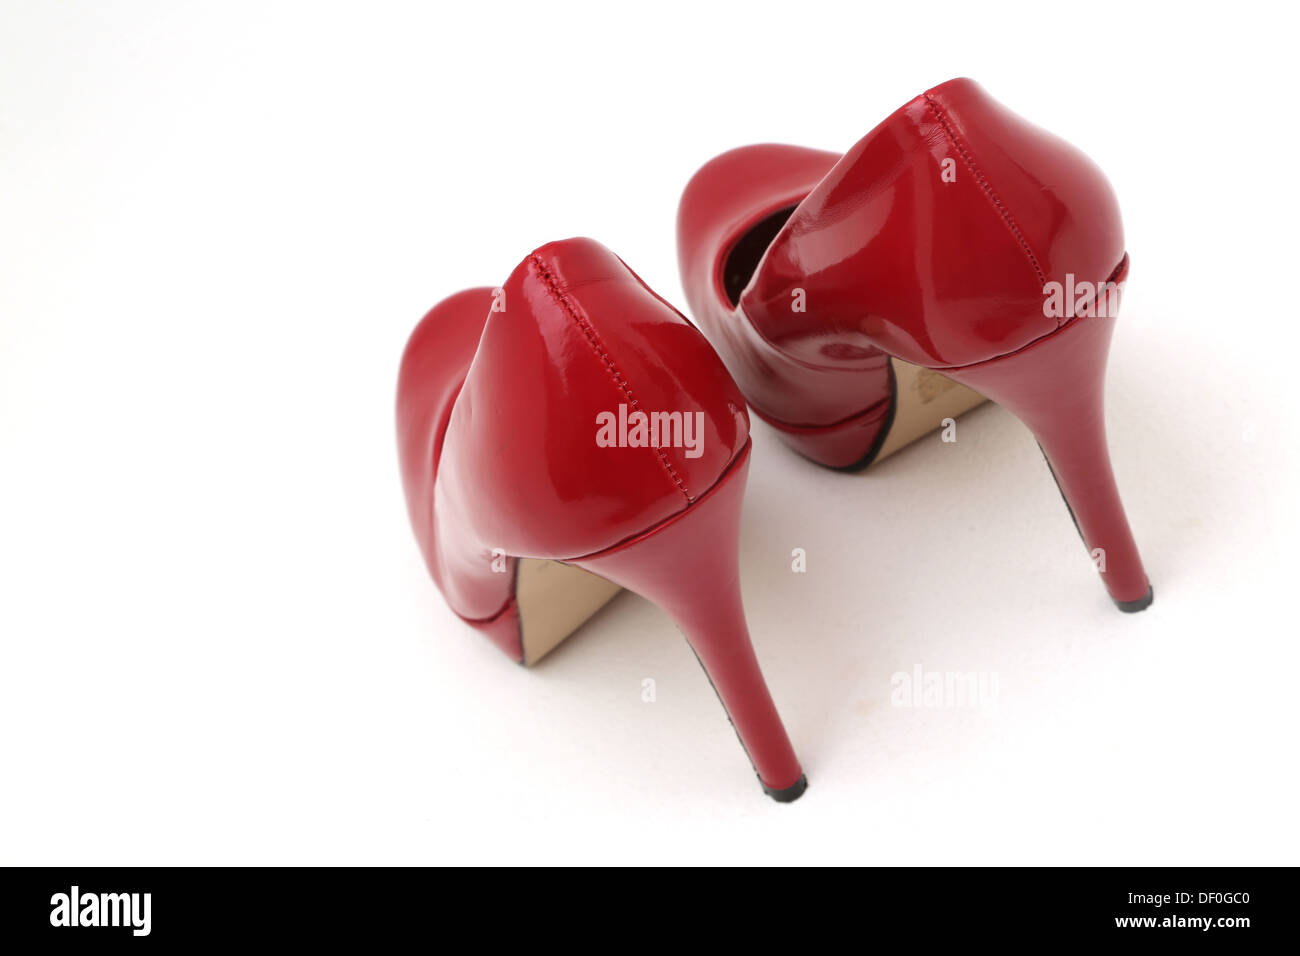 A Pair Of Red Stiletto heel Shoes Stock Photo